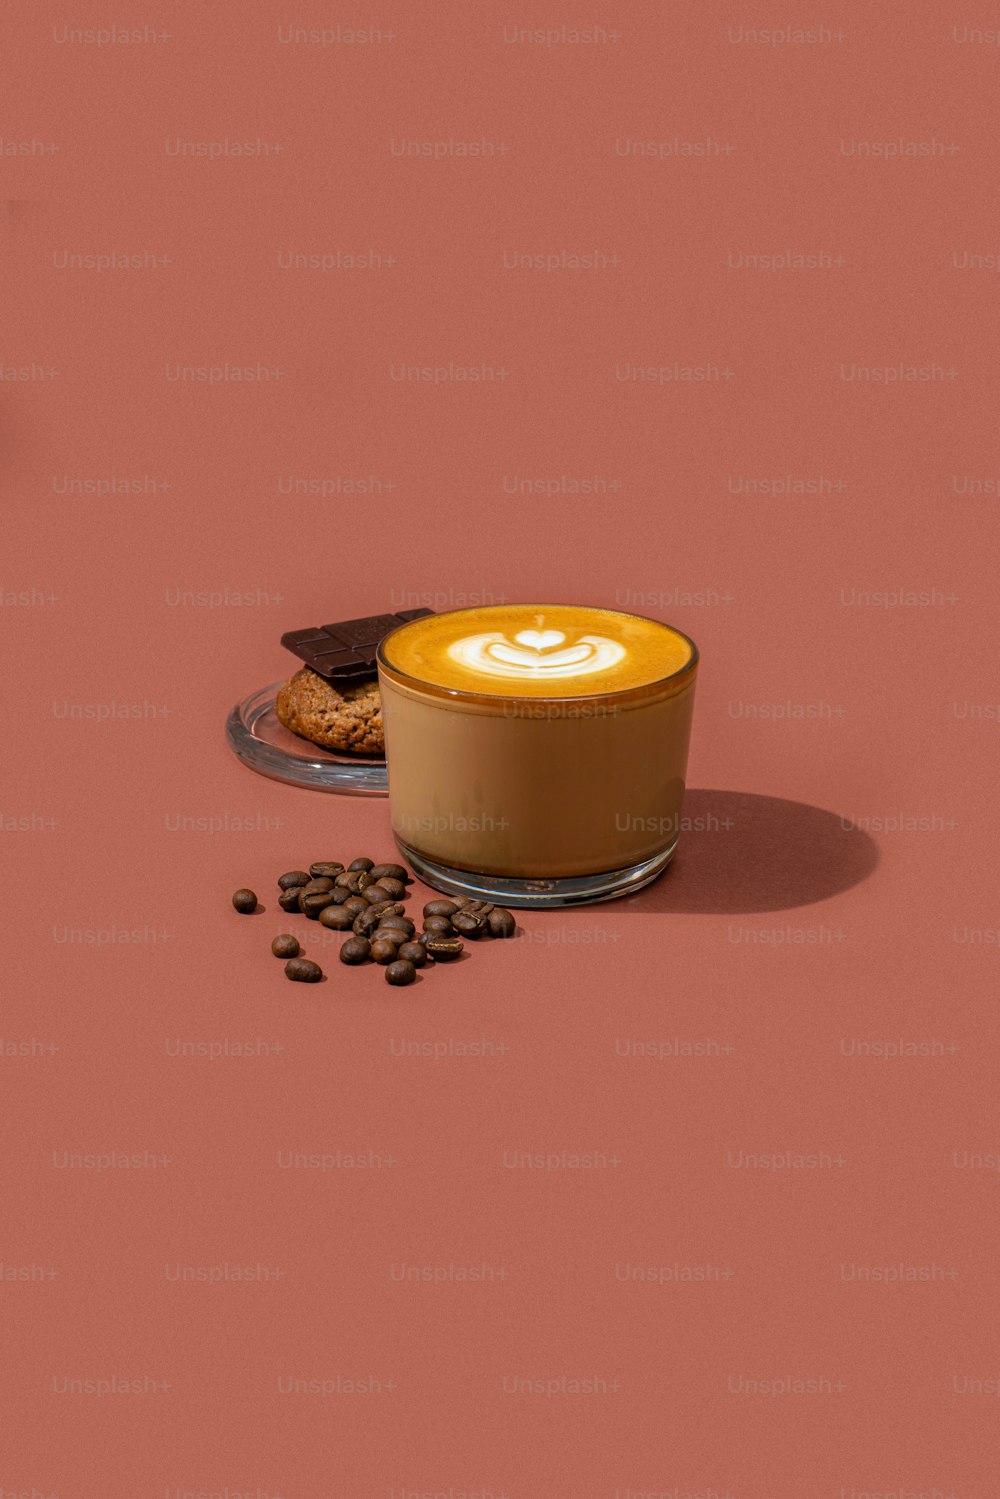 Iced Coffee Latte In Plastic Cup Isolated On White Background Clipping Path  Included Stock Photo - Download Image Now - iStock